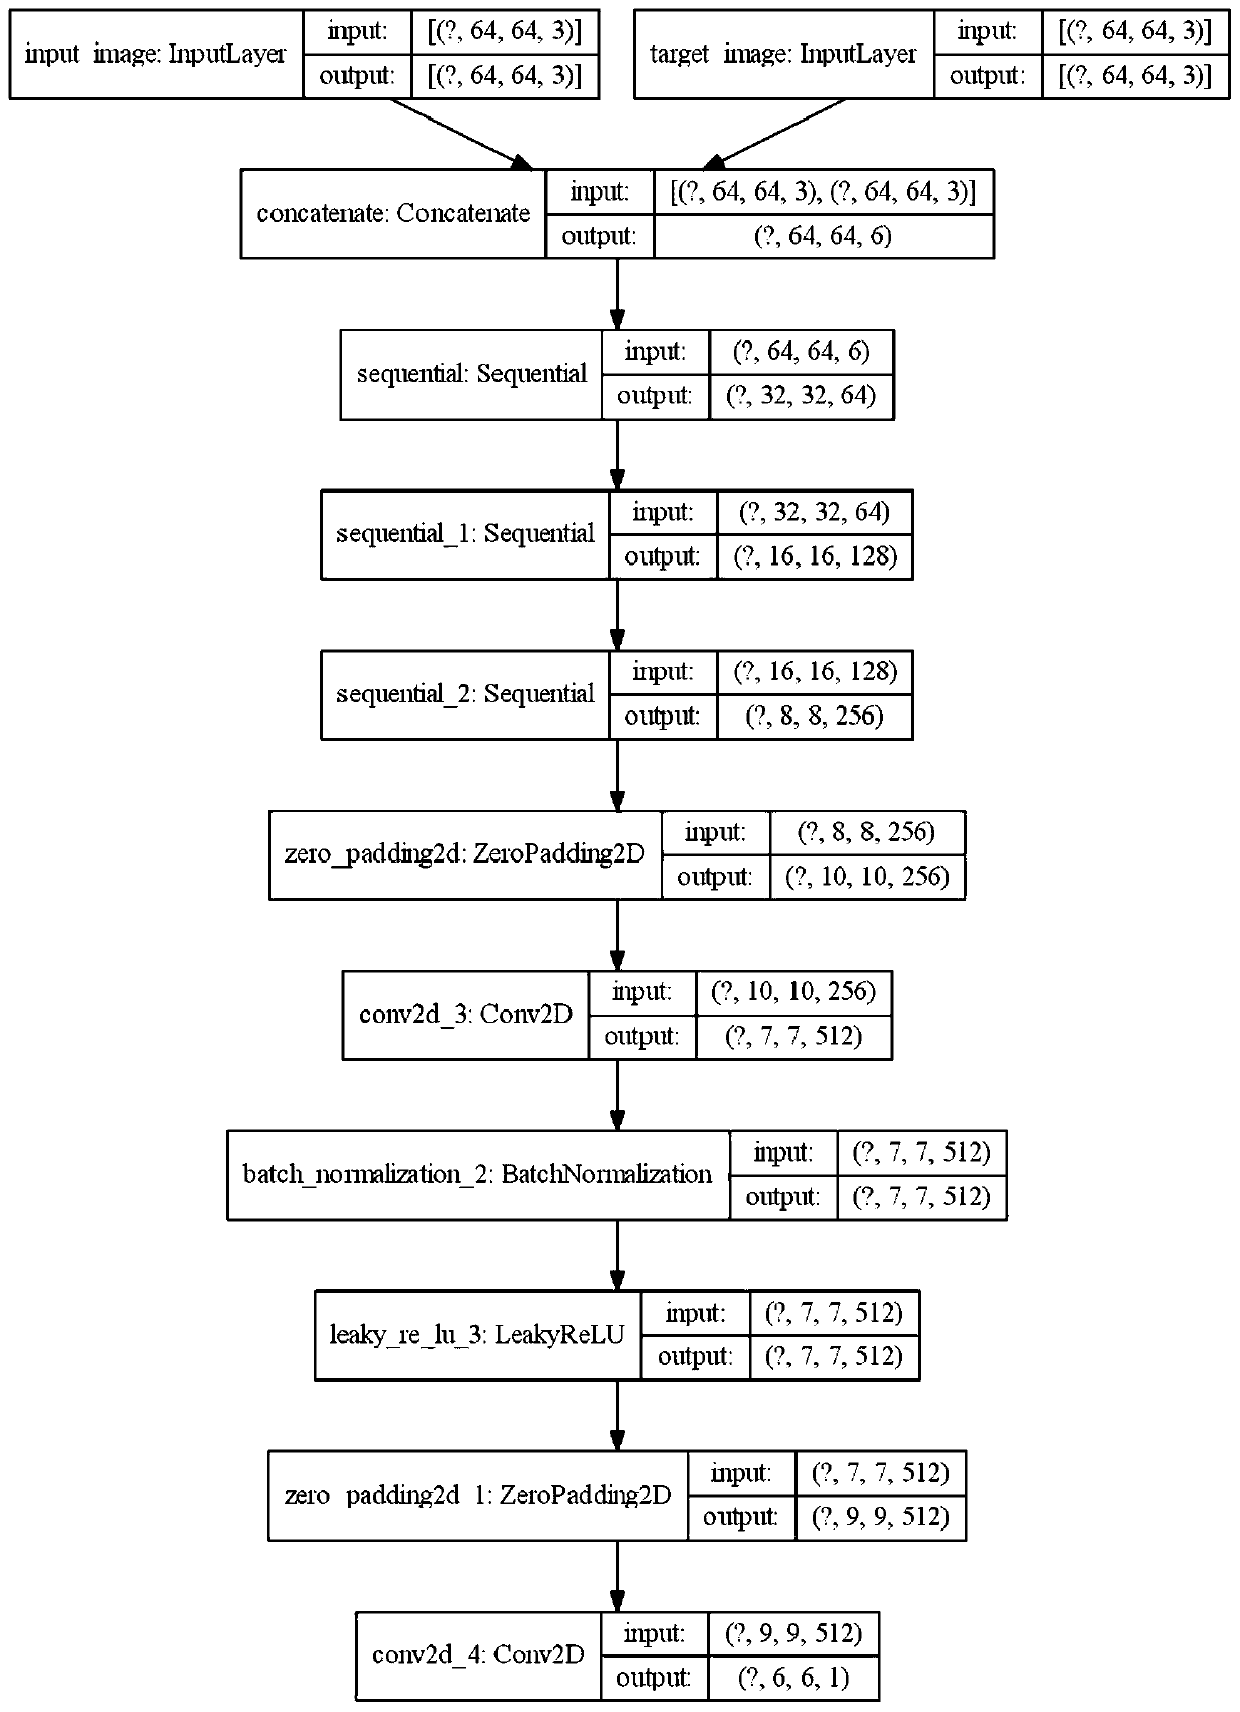 Image anti-theft system and method based on deep learning